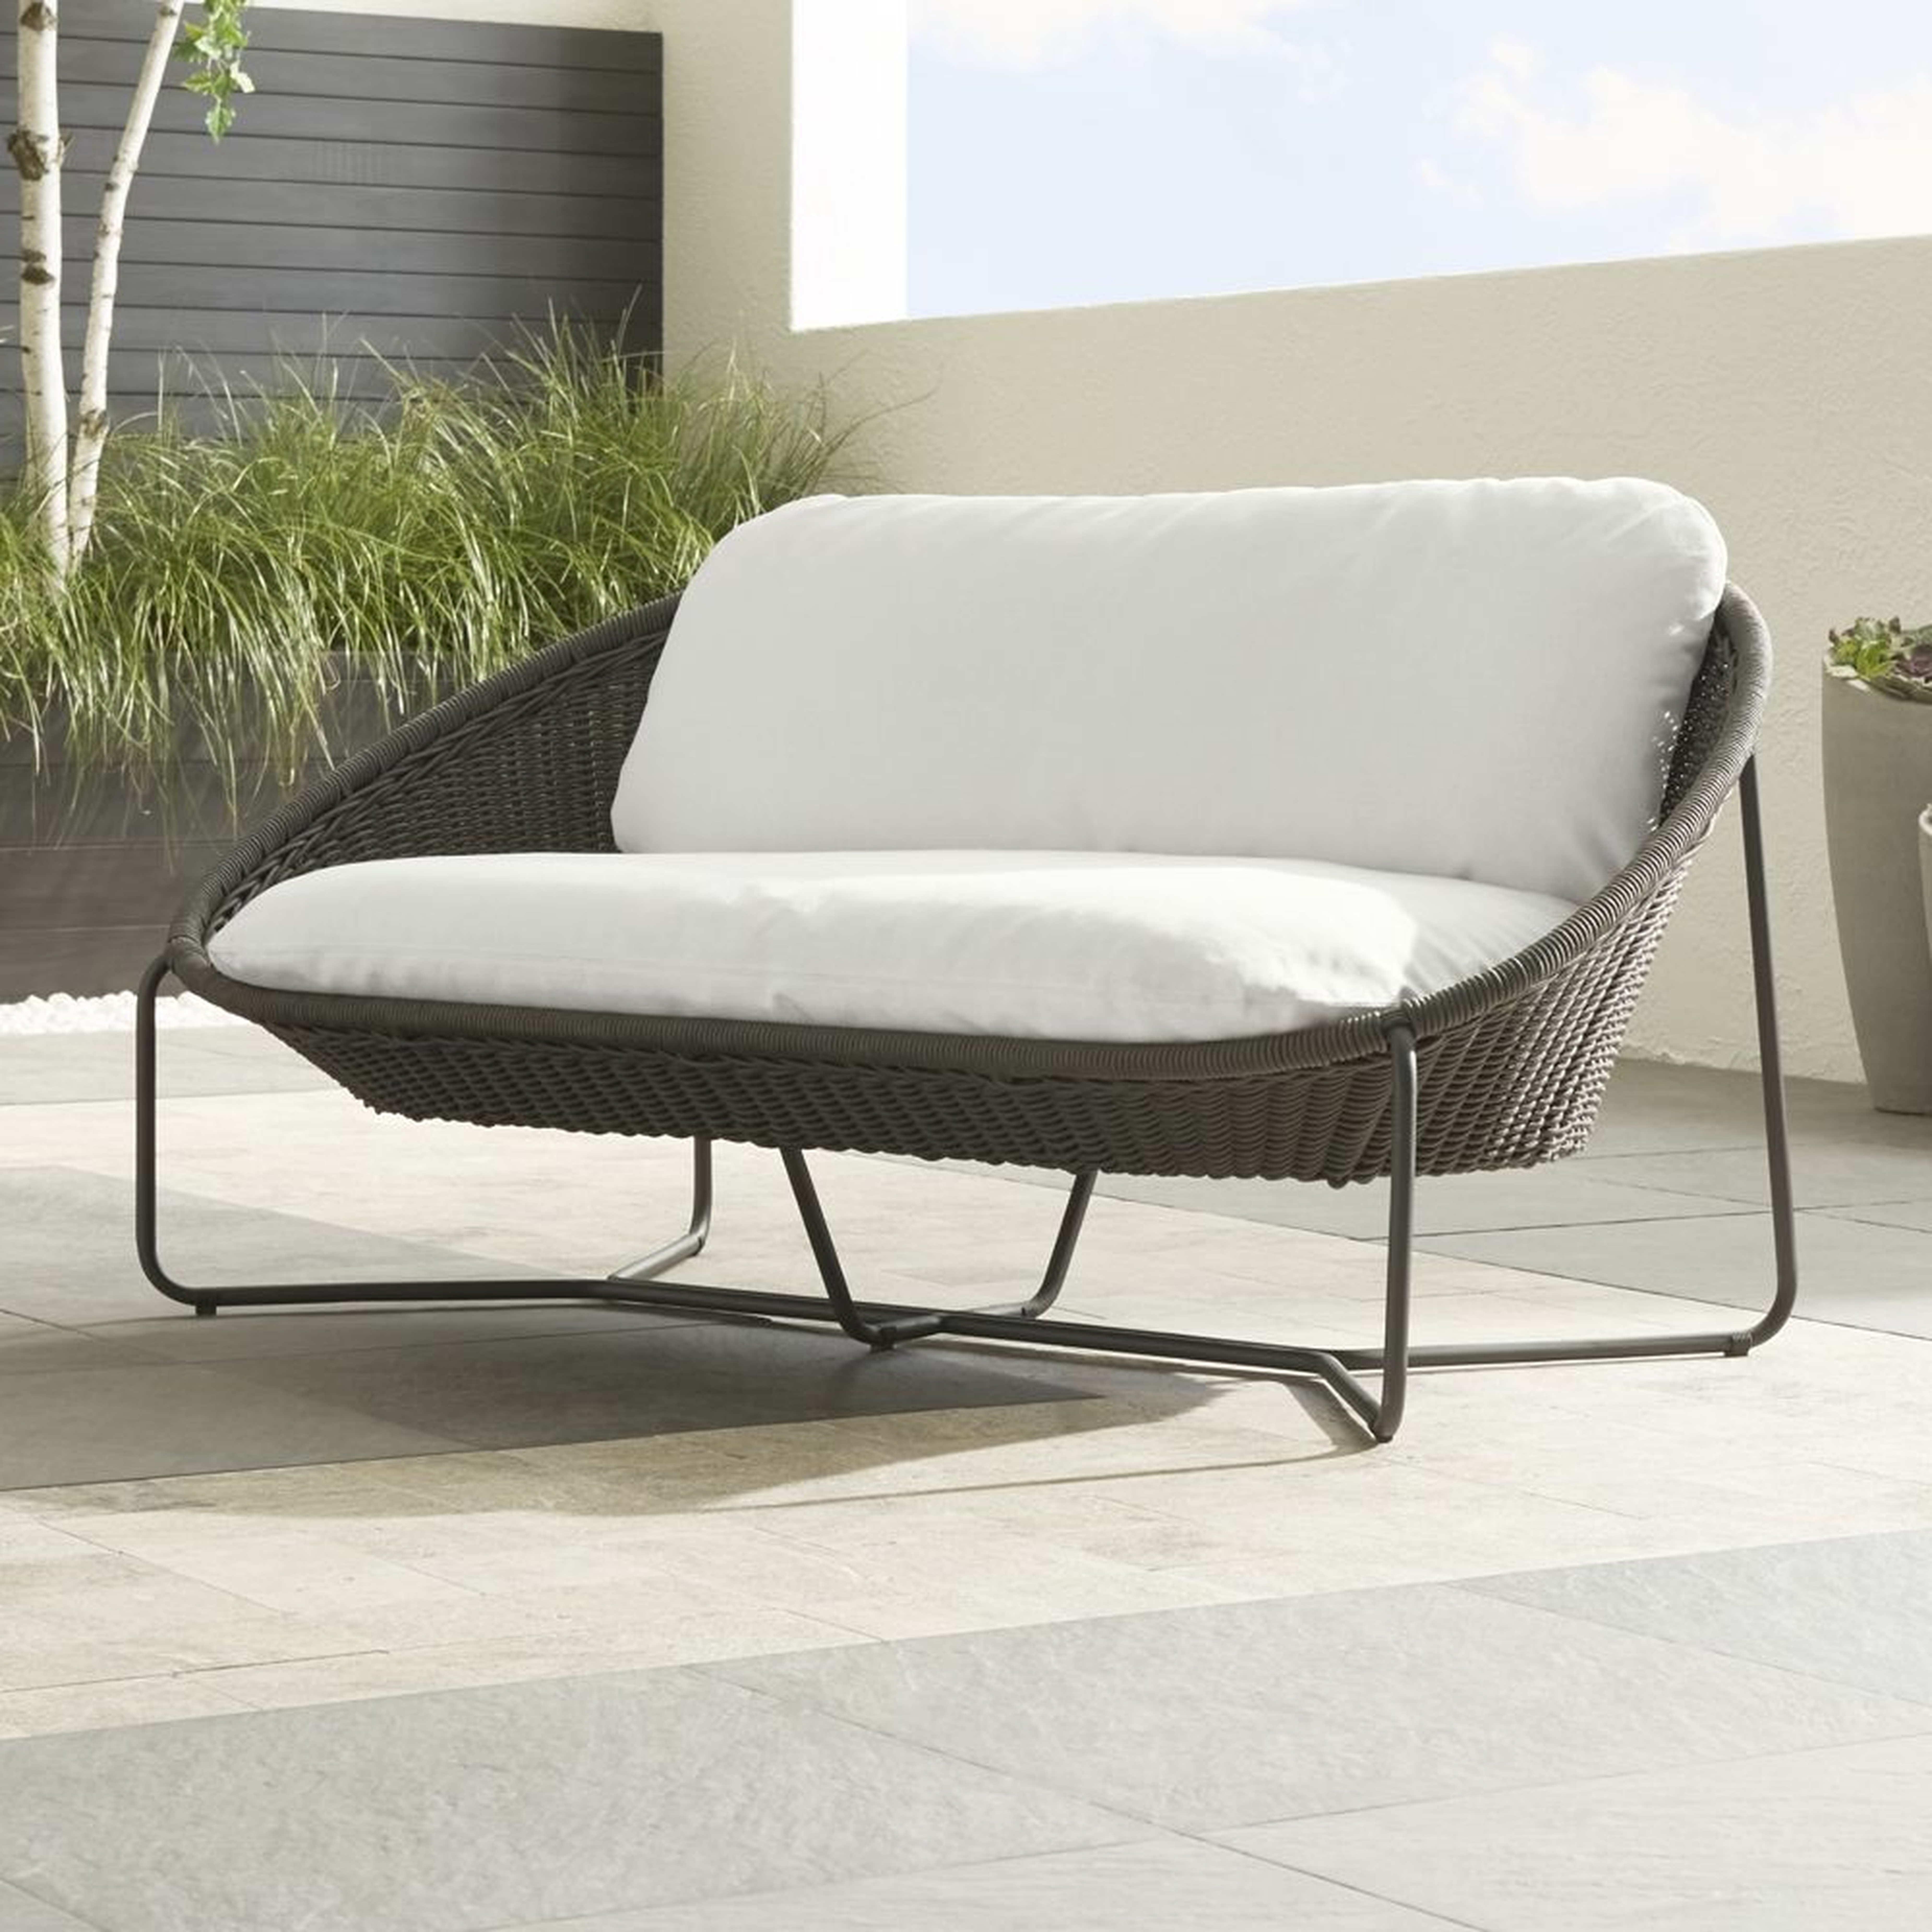 Morocco Graphite Oval Outdoor Loveseat with White Cushion - Crate and Barrel